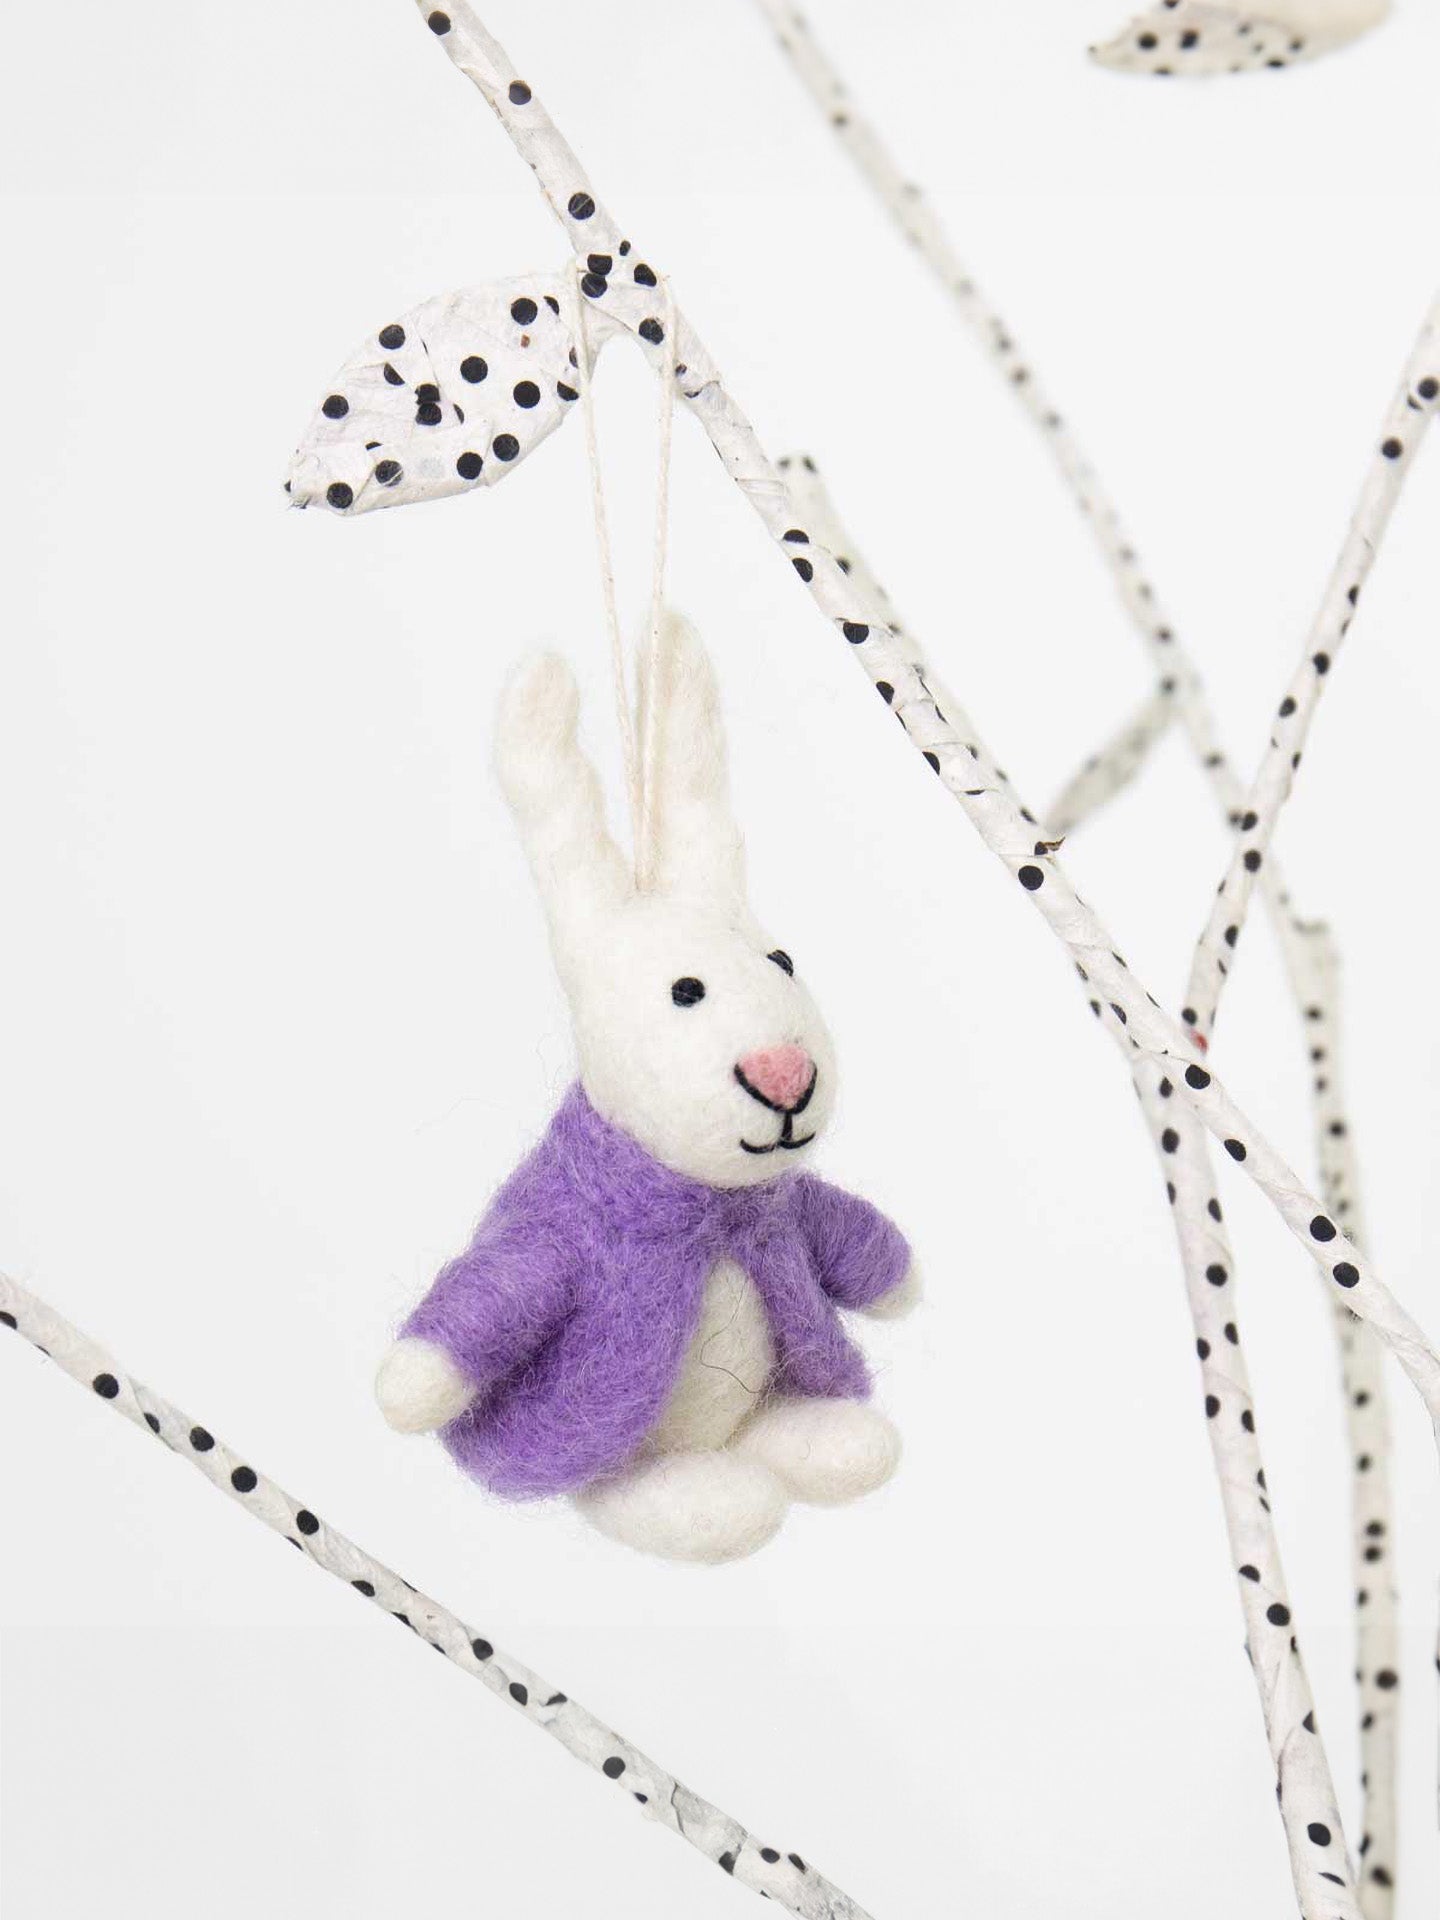 Bunny with Lilac Coat Easter ornament